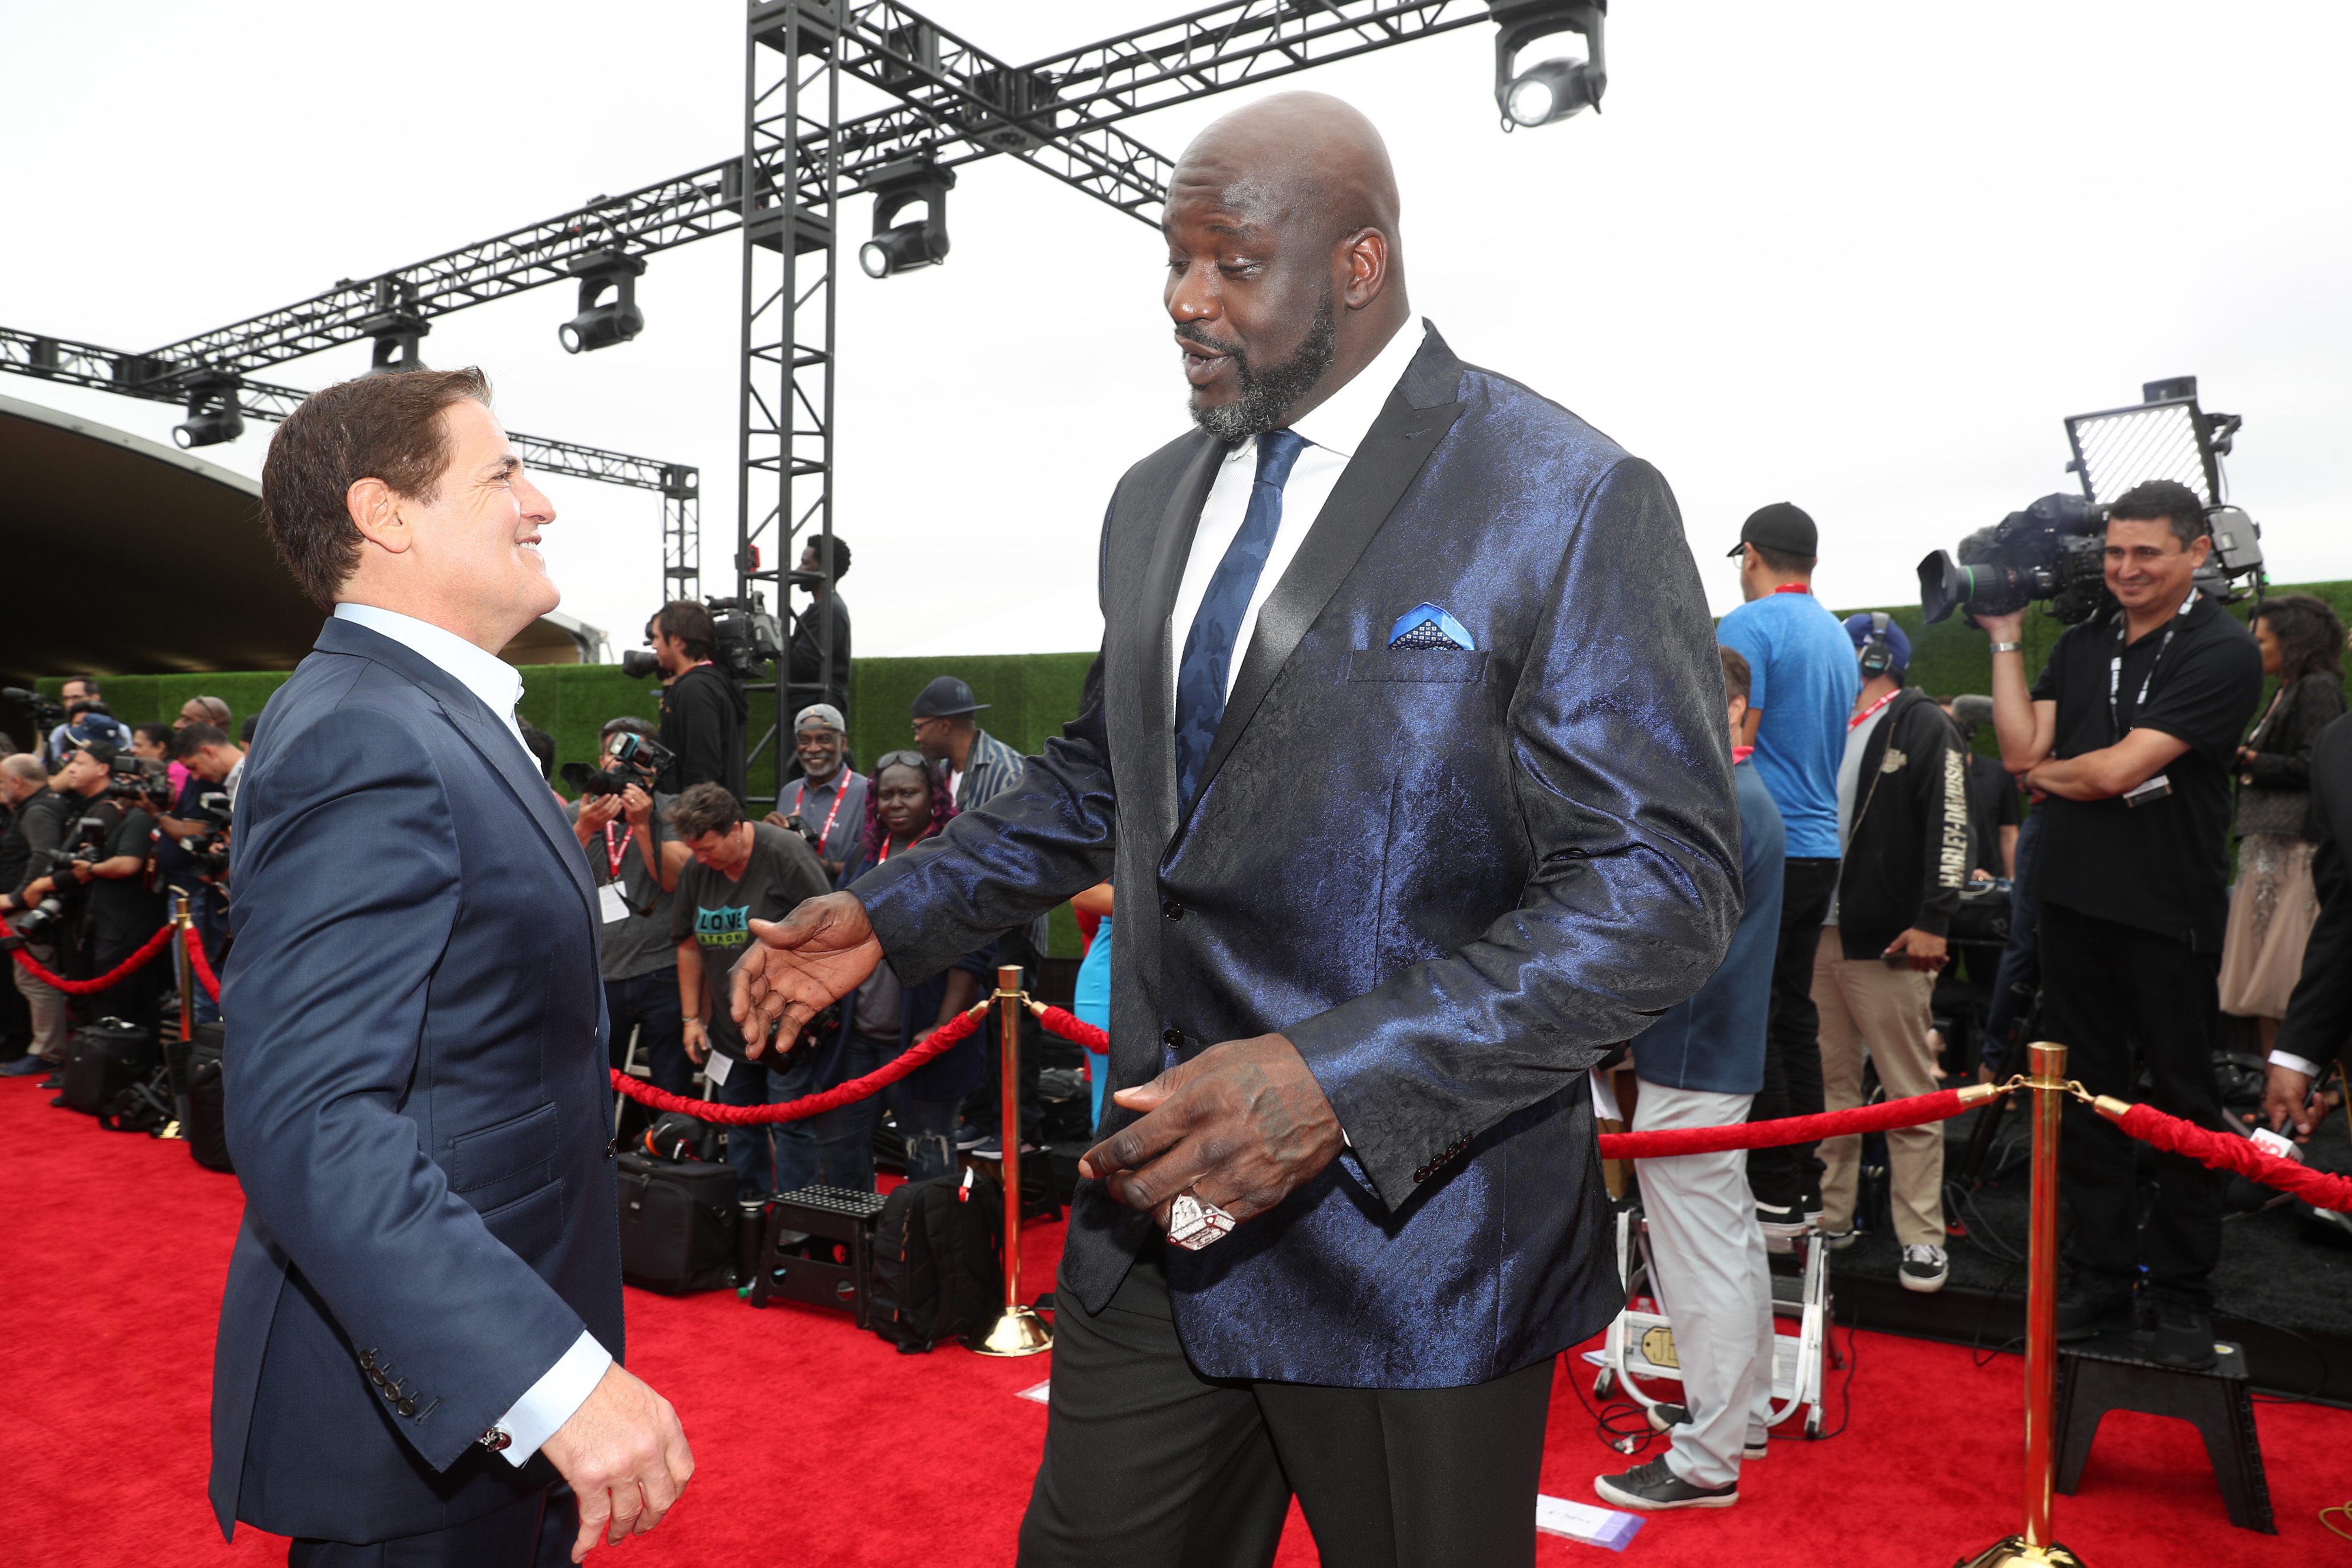 Mavericks governor Mark Cuban and former Lakers star Shaquille O'Neal talk during the 2019 NBA Awards